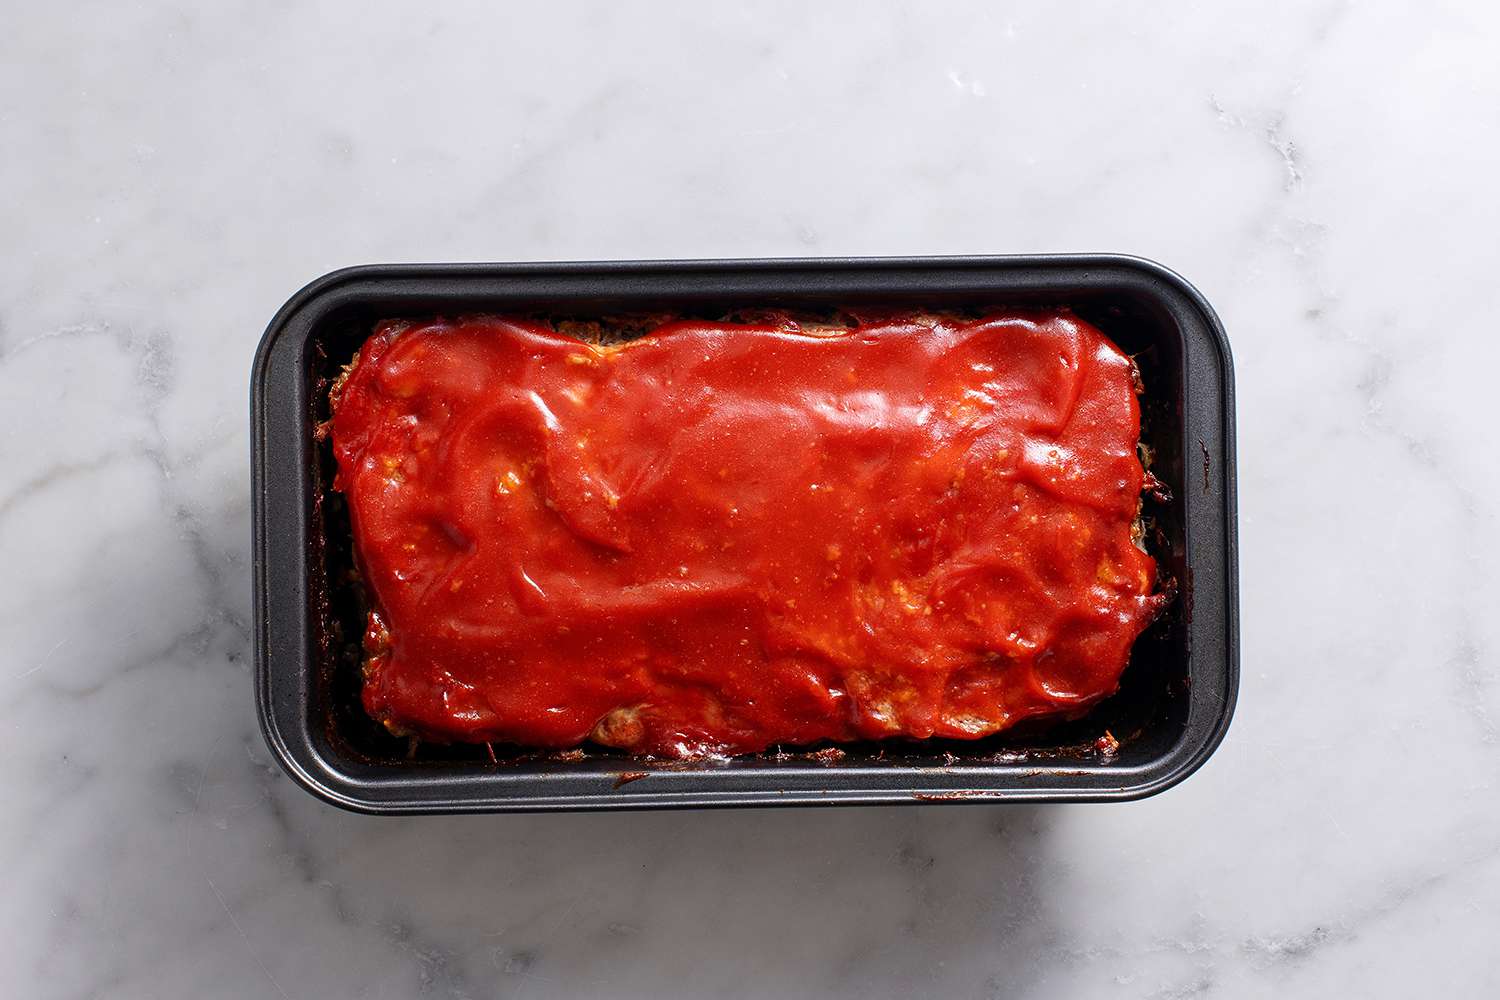 Baked meatloaf in a loaf pan evenly topped with more ketchup glaze